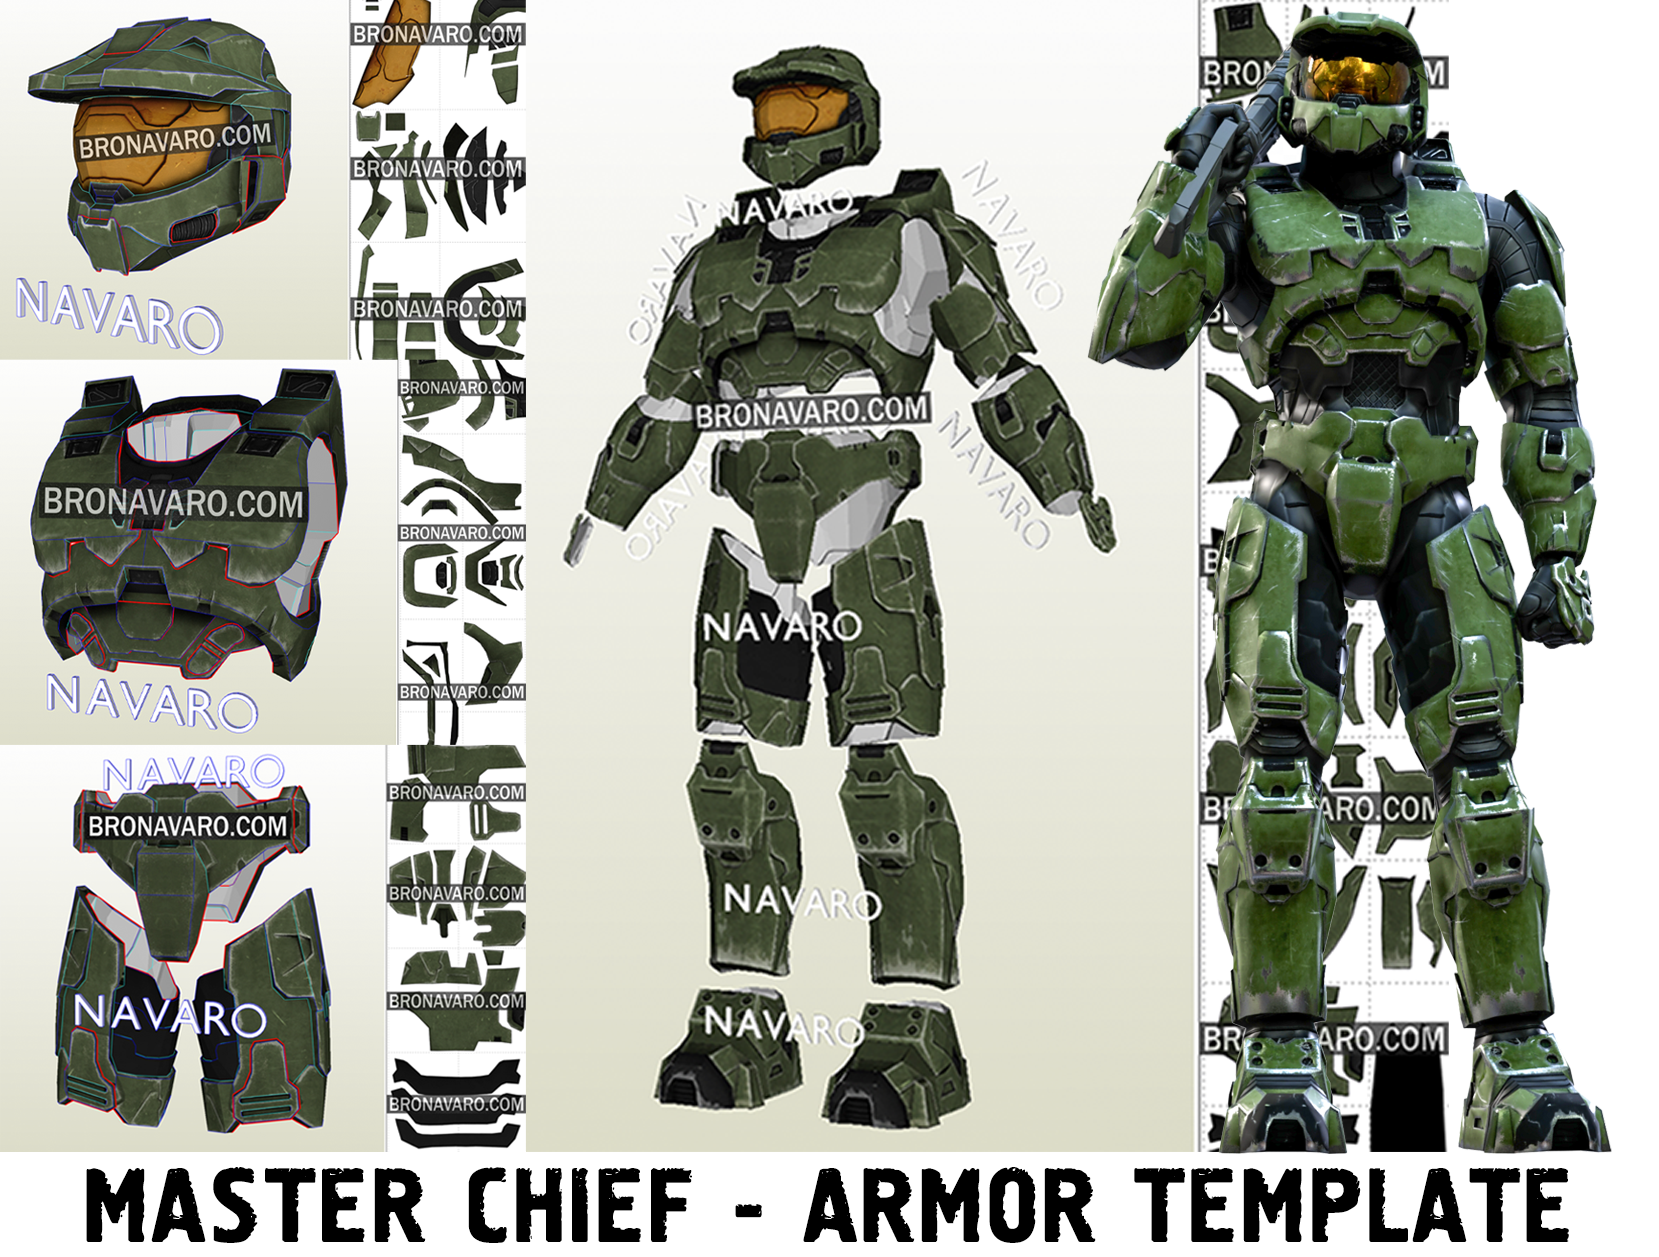 halo 4 master chief armor drawing